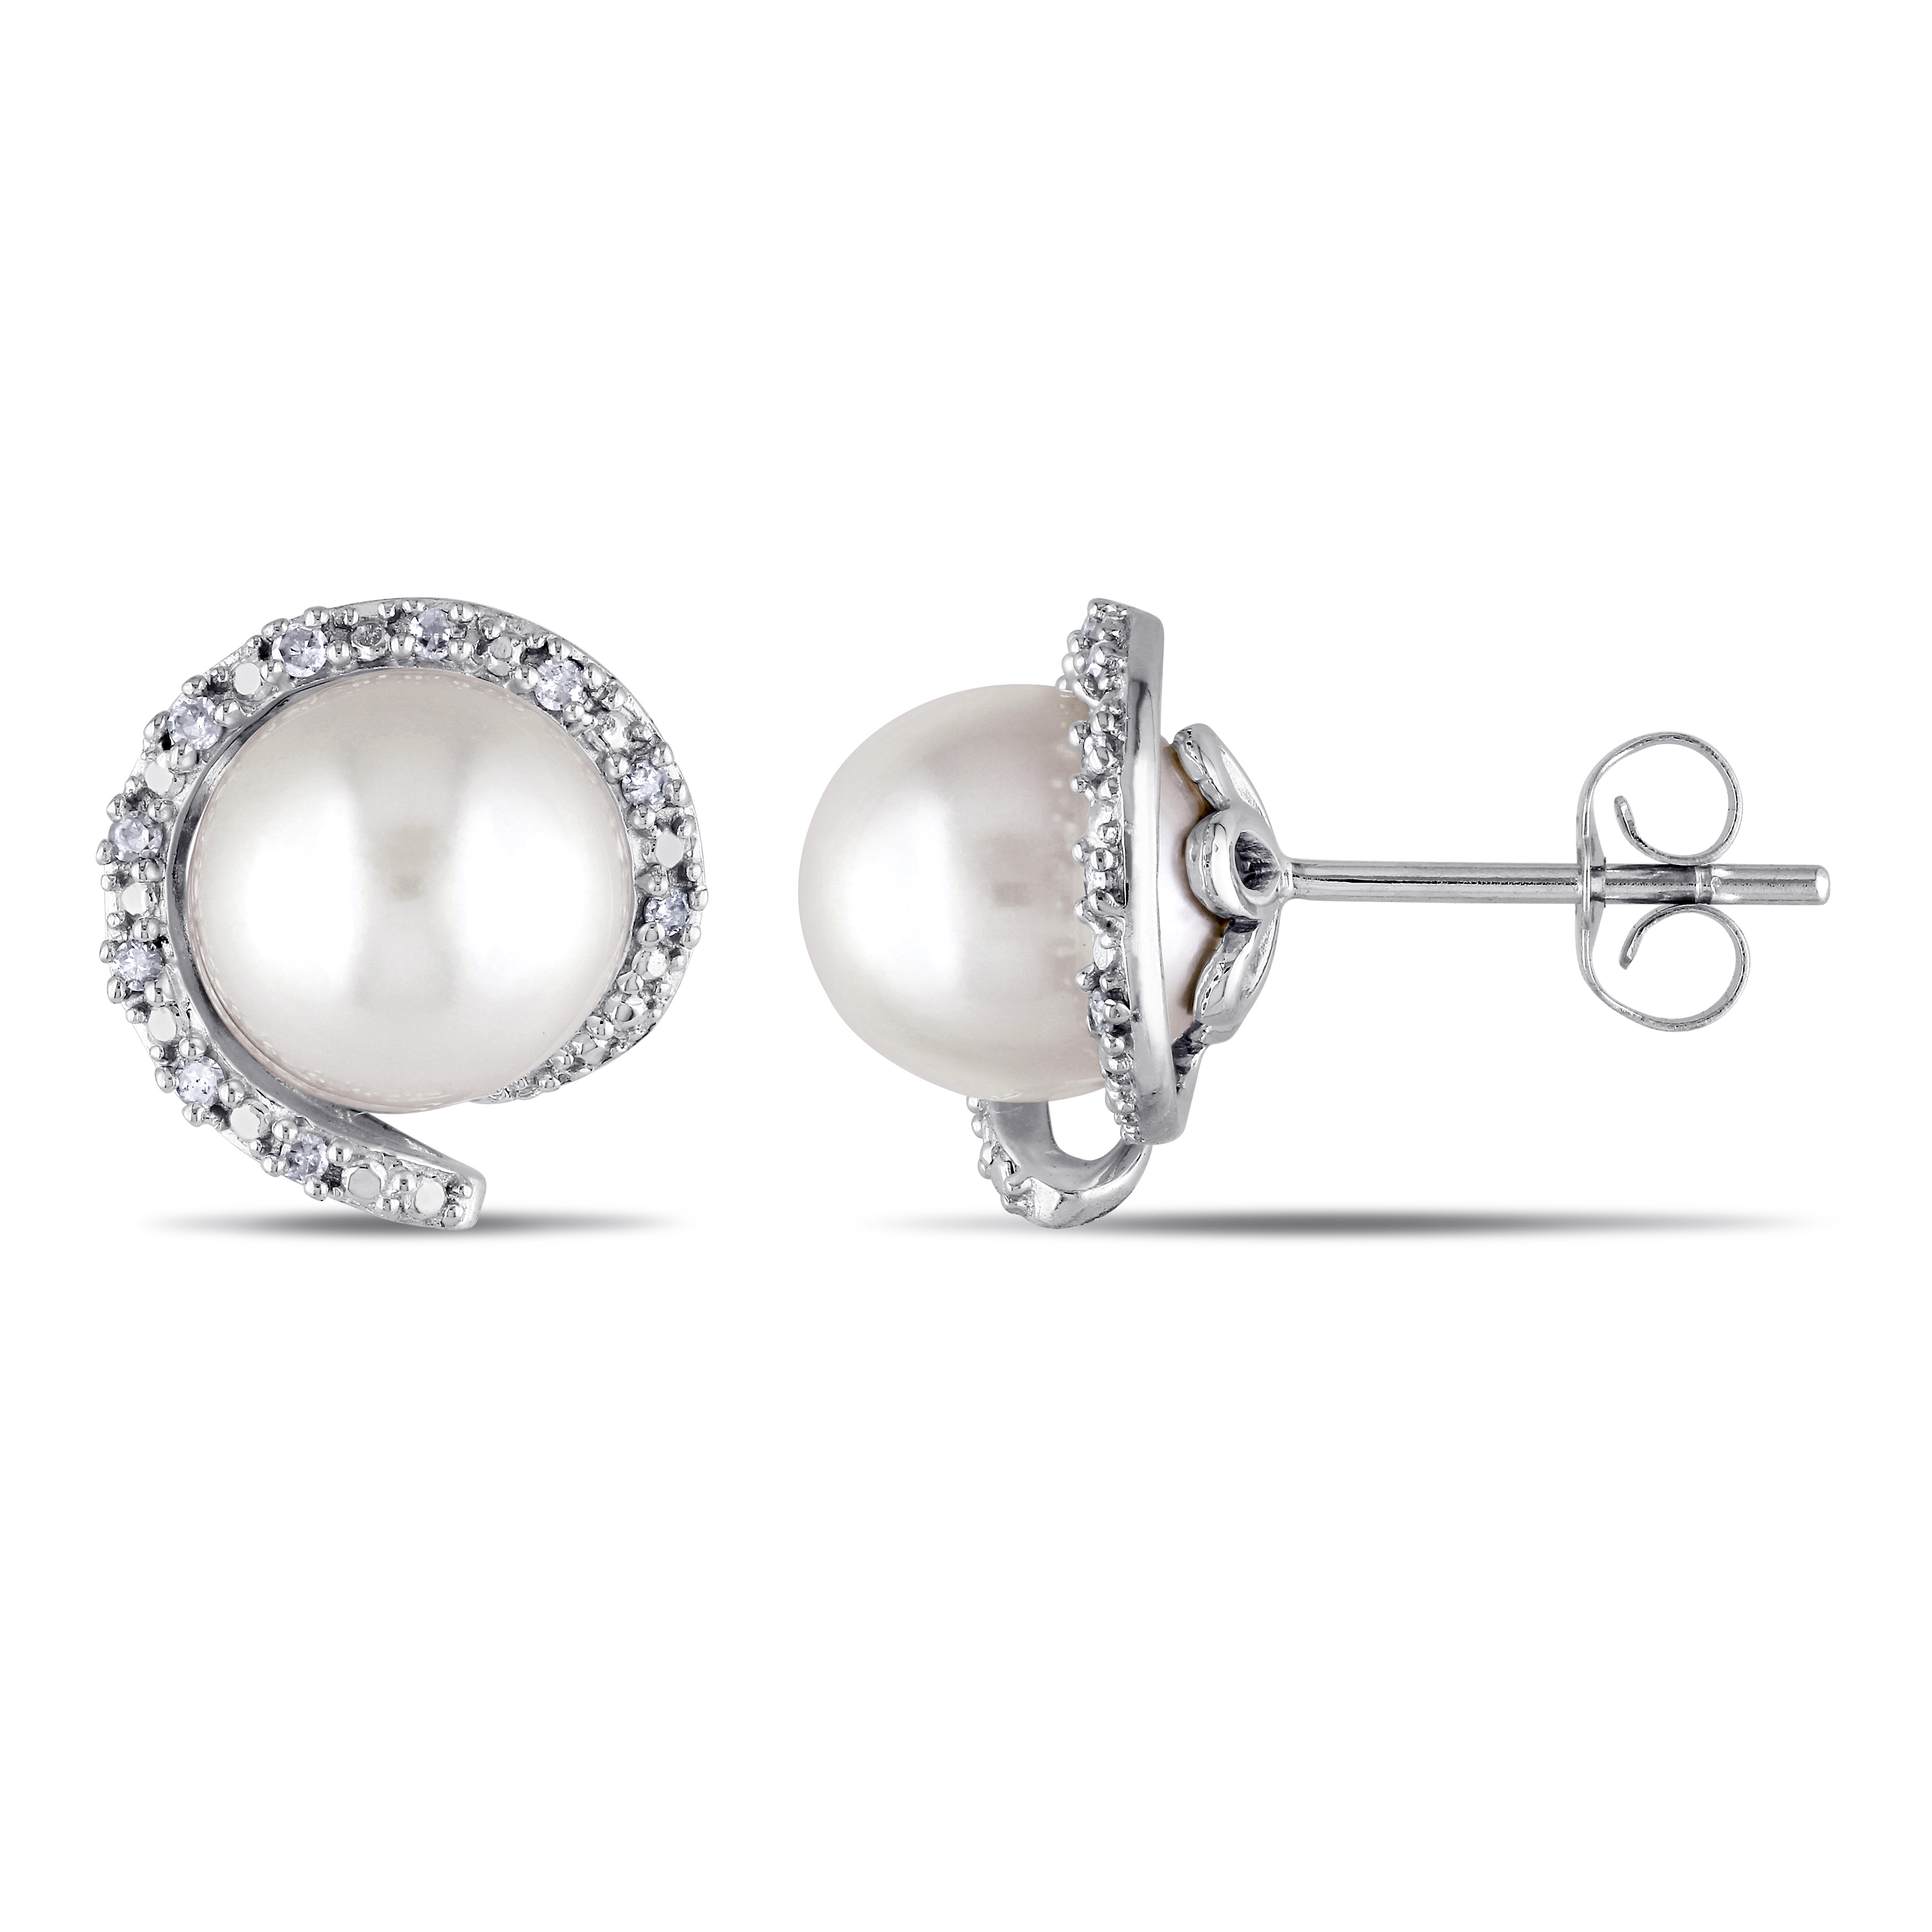 8 - 8.5 MM Cultured Freshwater Pearl and 1/10 CT TW Diamond Stud Earrings in 10k White Gold